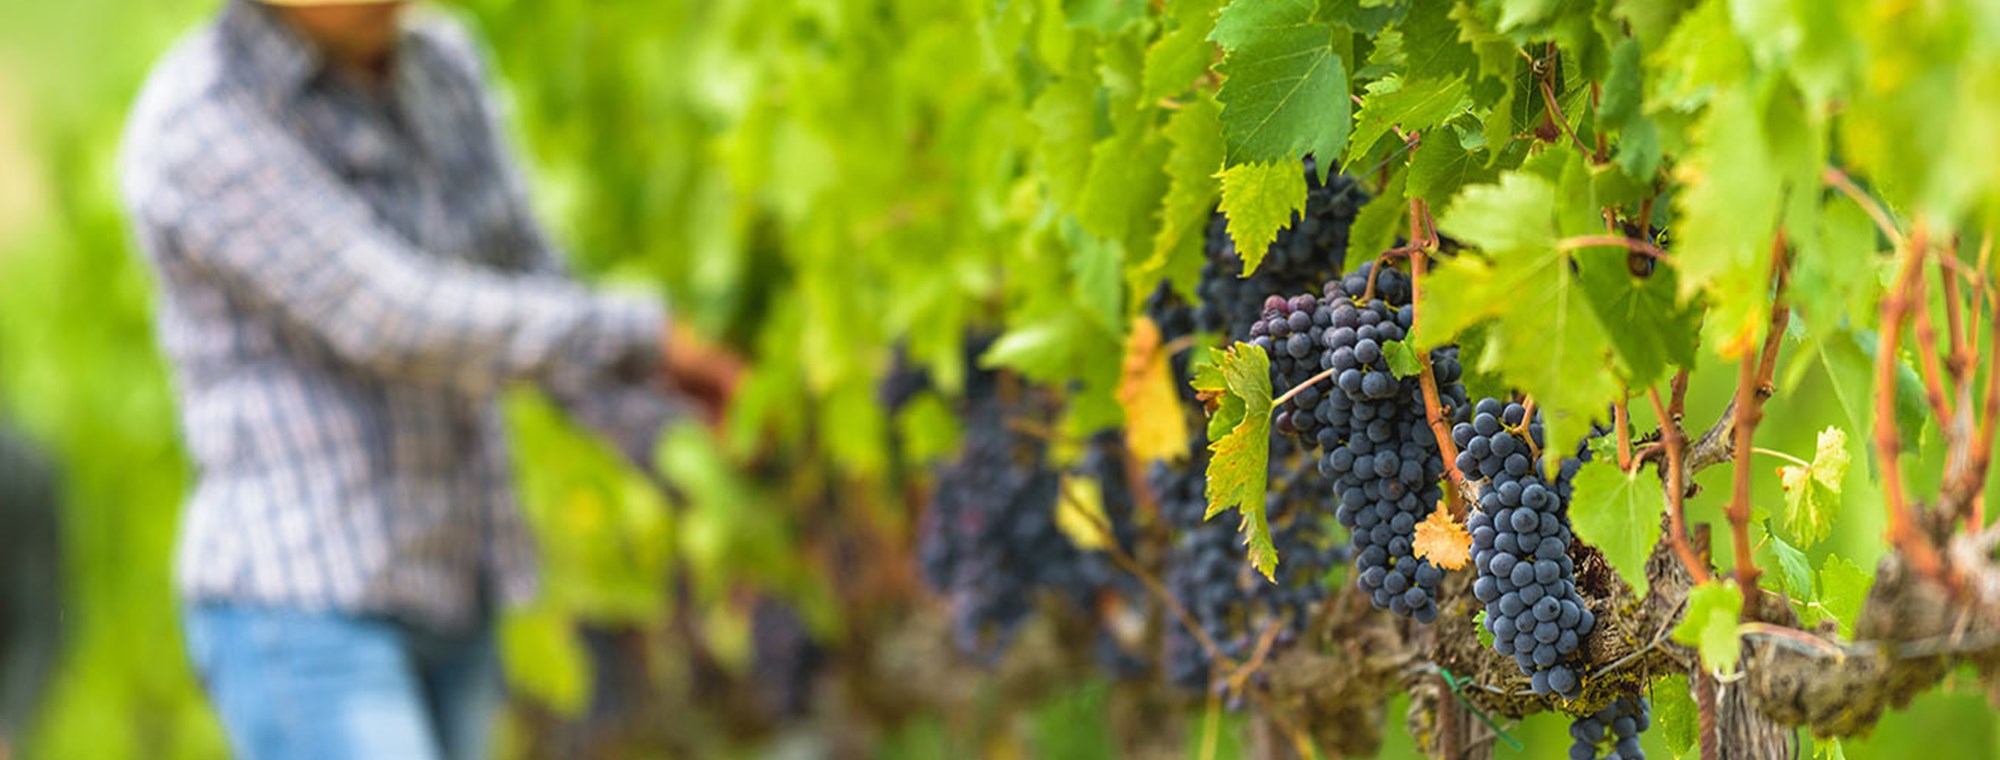 Ripe grapes hanging on vine, ready to be harvested in Napa Valley, California